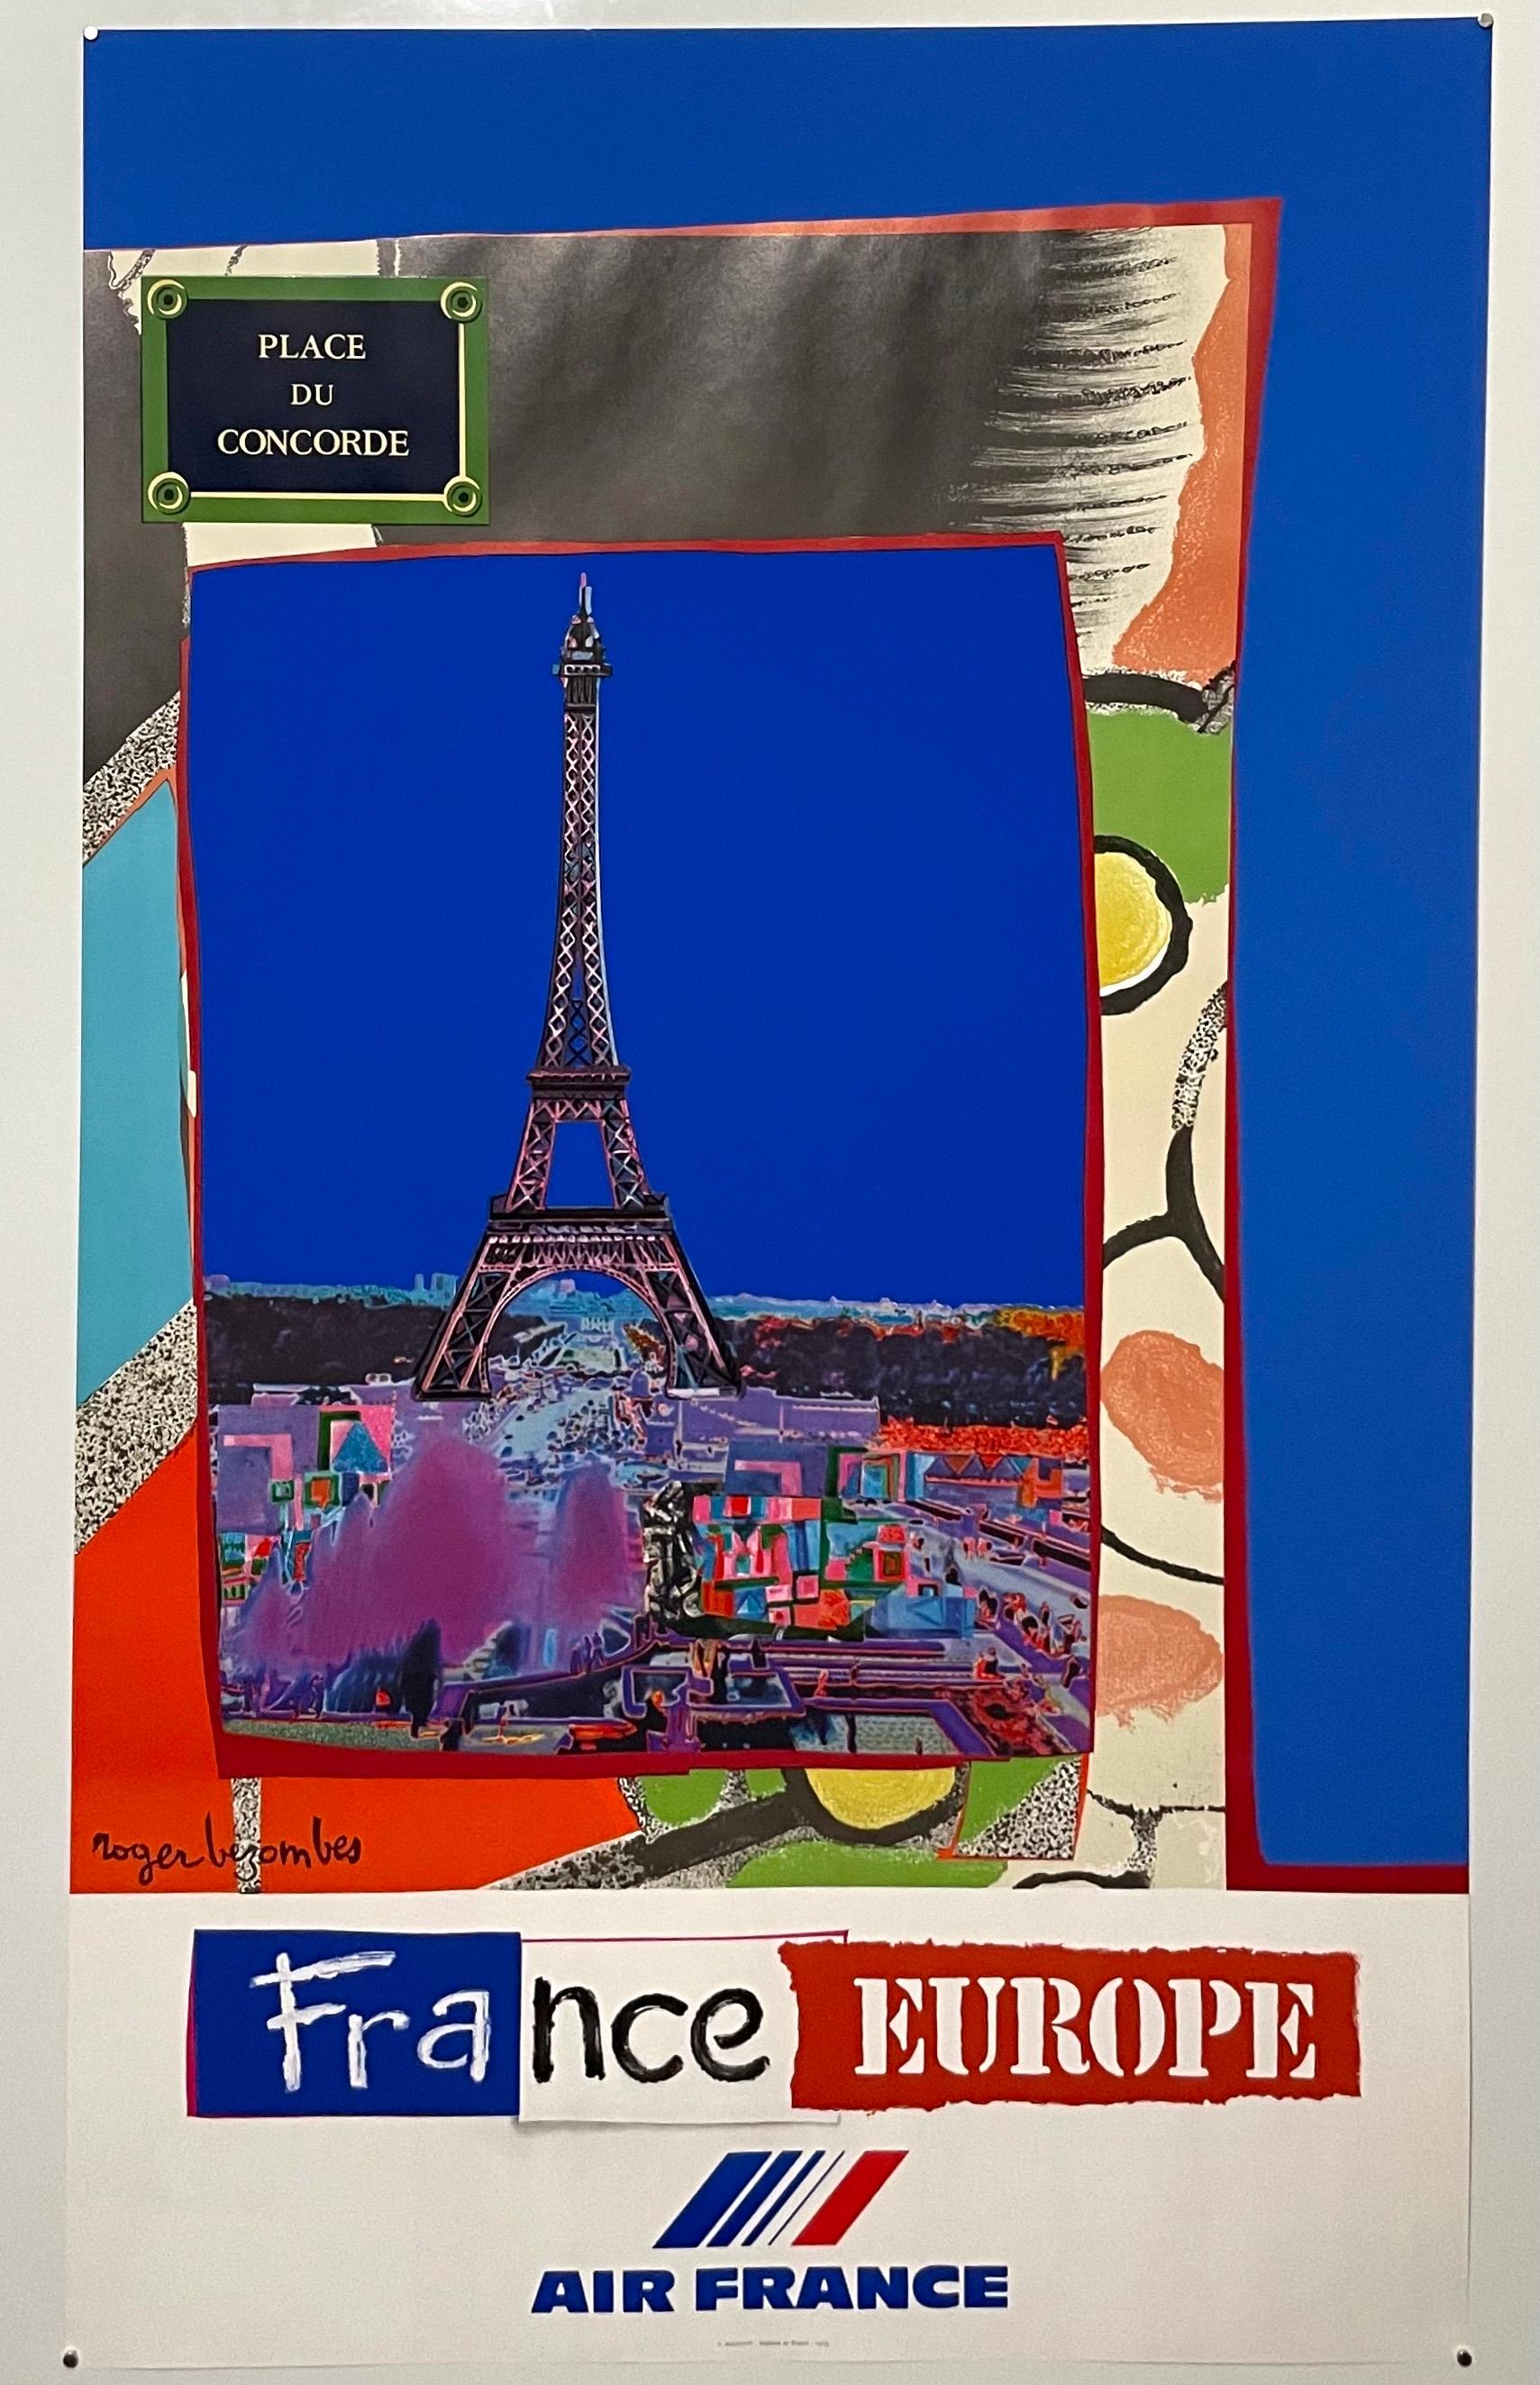 Vintage French Travel Poster, Air france

Roger Bezombes
(1913-1994) French
Bezombes was a painter, sculptor, medalist, and designer. He studied in Paris, at the École des Beaux-Arts, and was much influenced by his friendship with Maurice Denis.